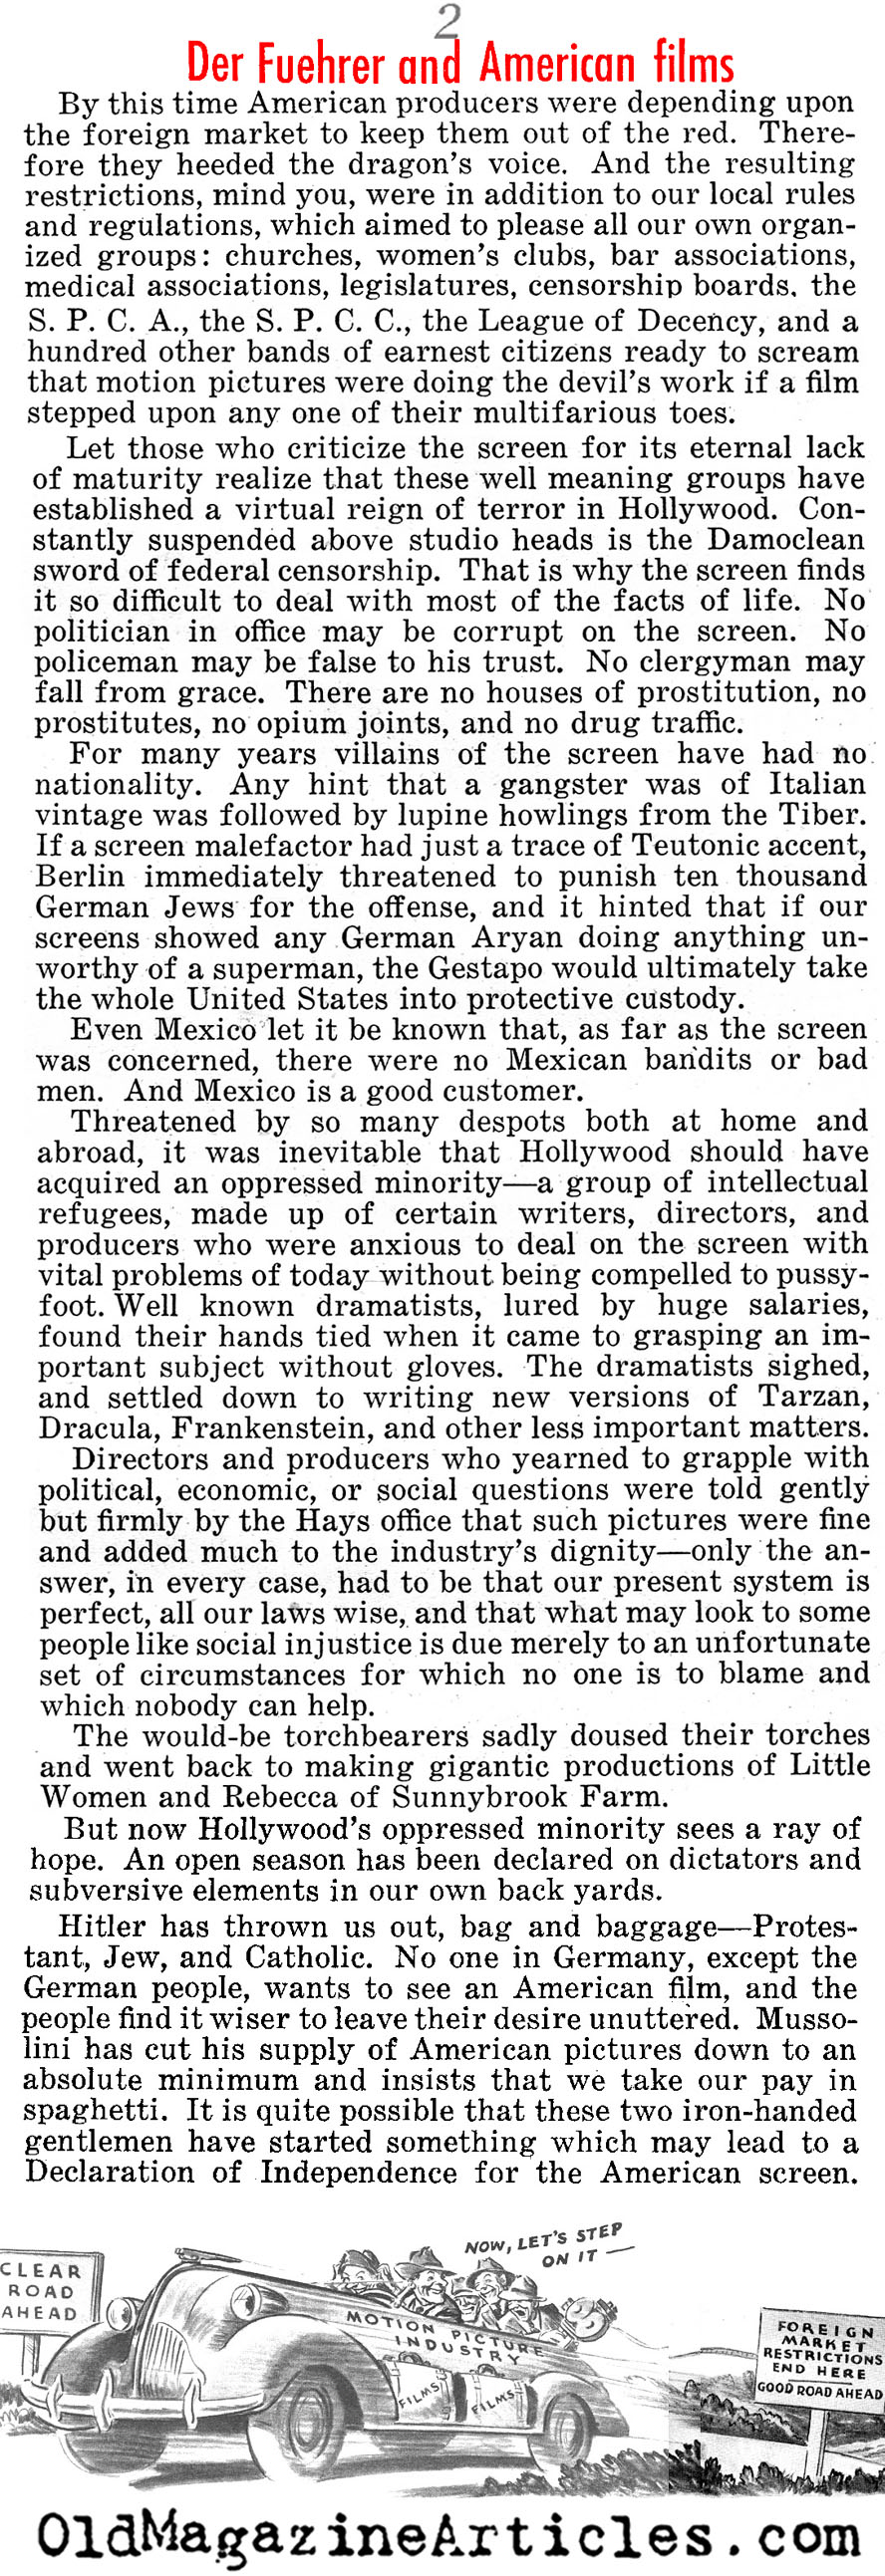 When Hollywood Wished Not to Offend Hitler (Liberty Magazine, 1939)